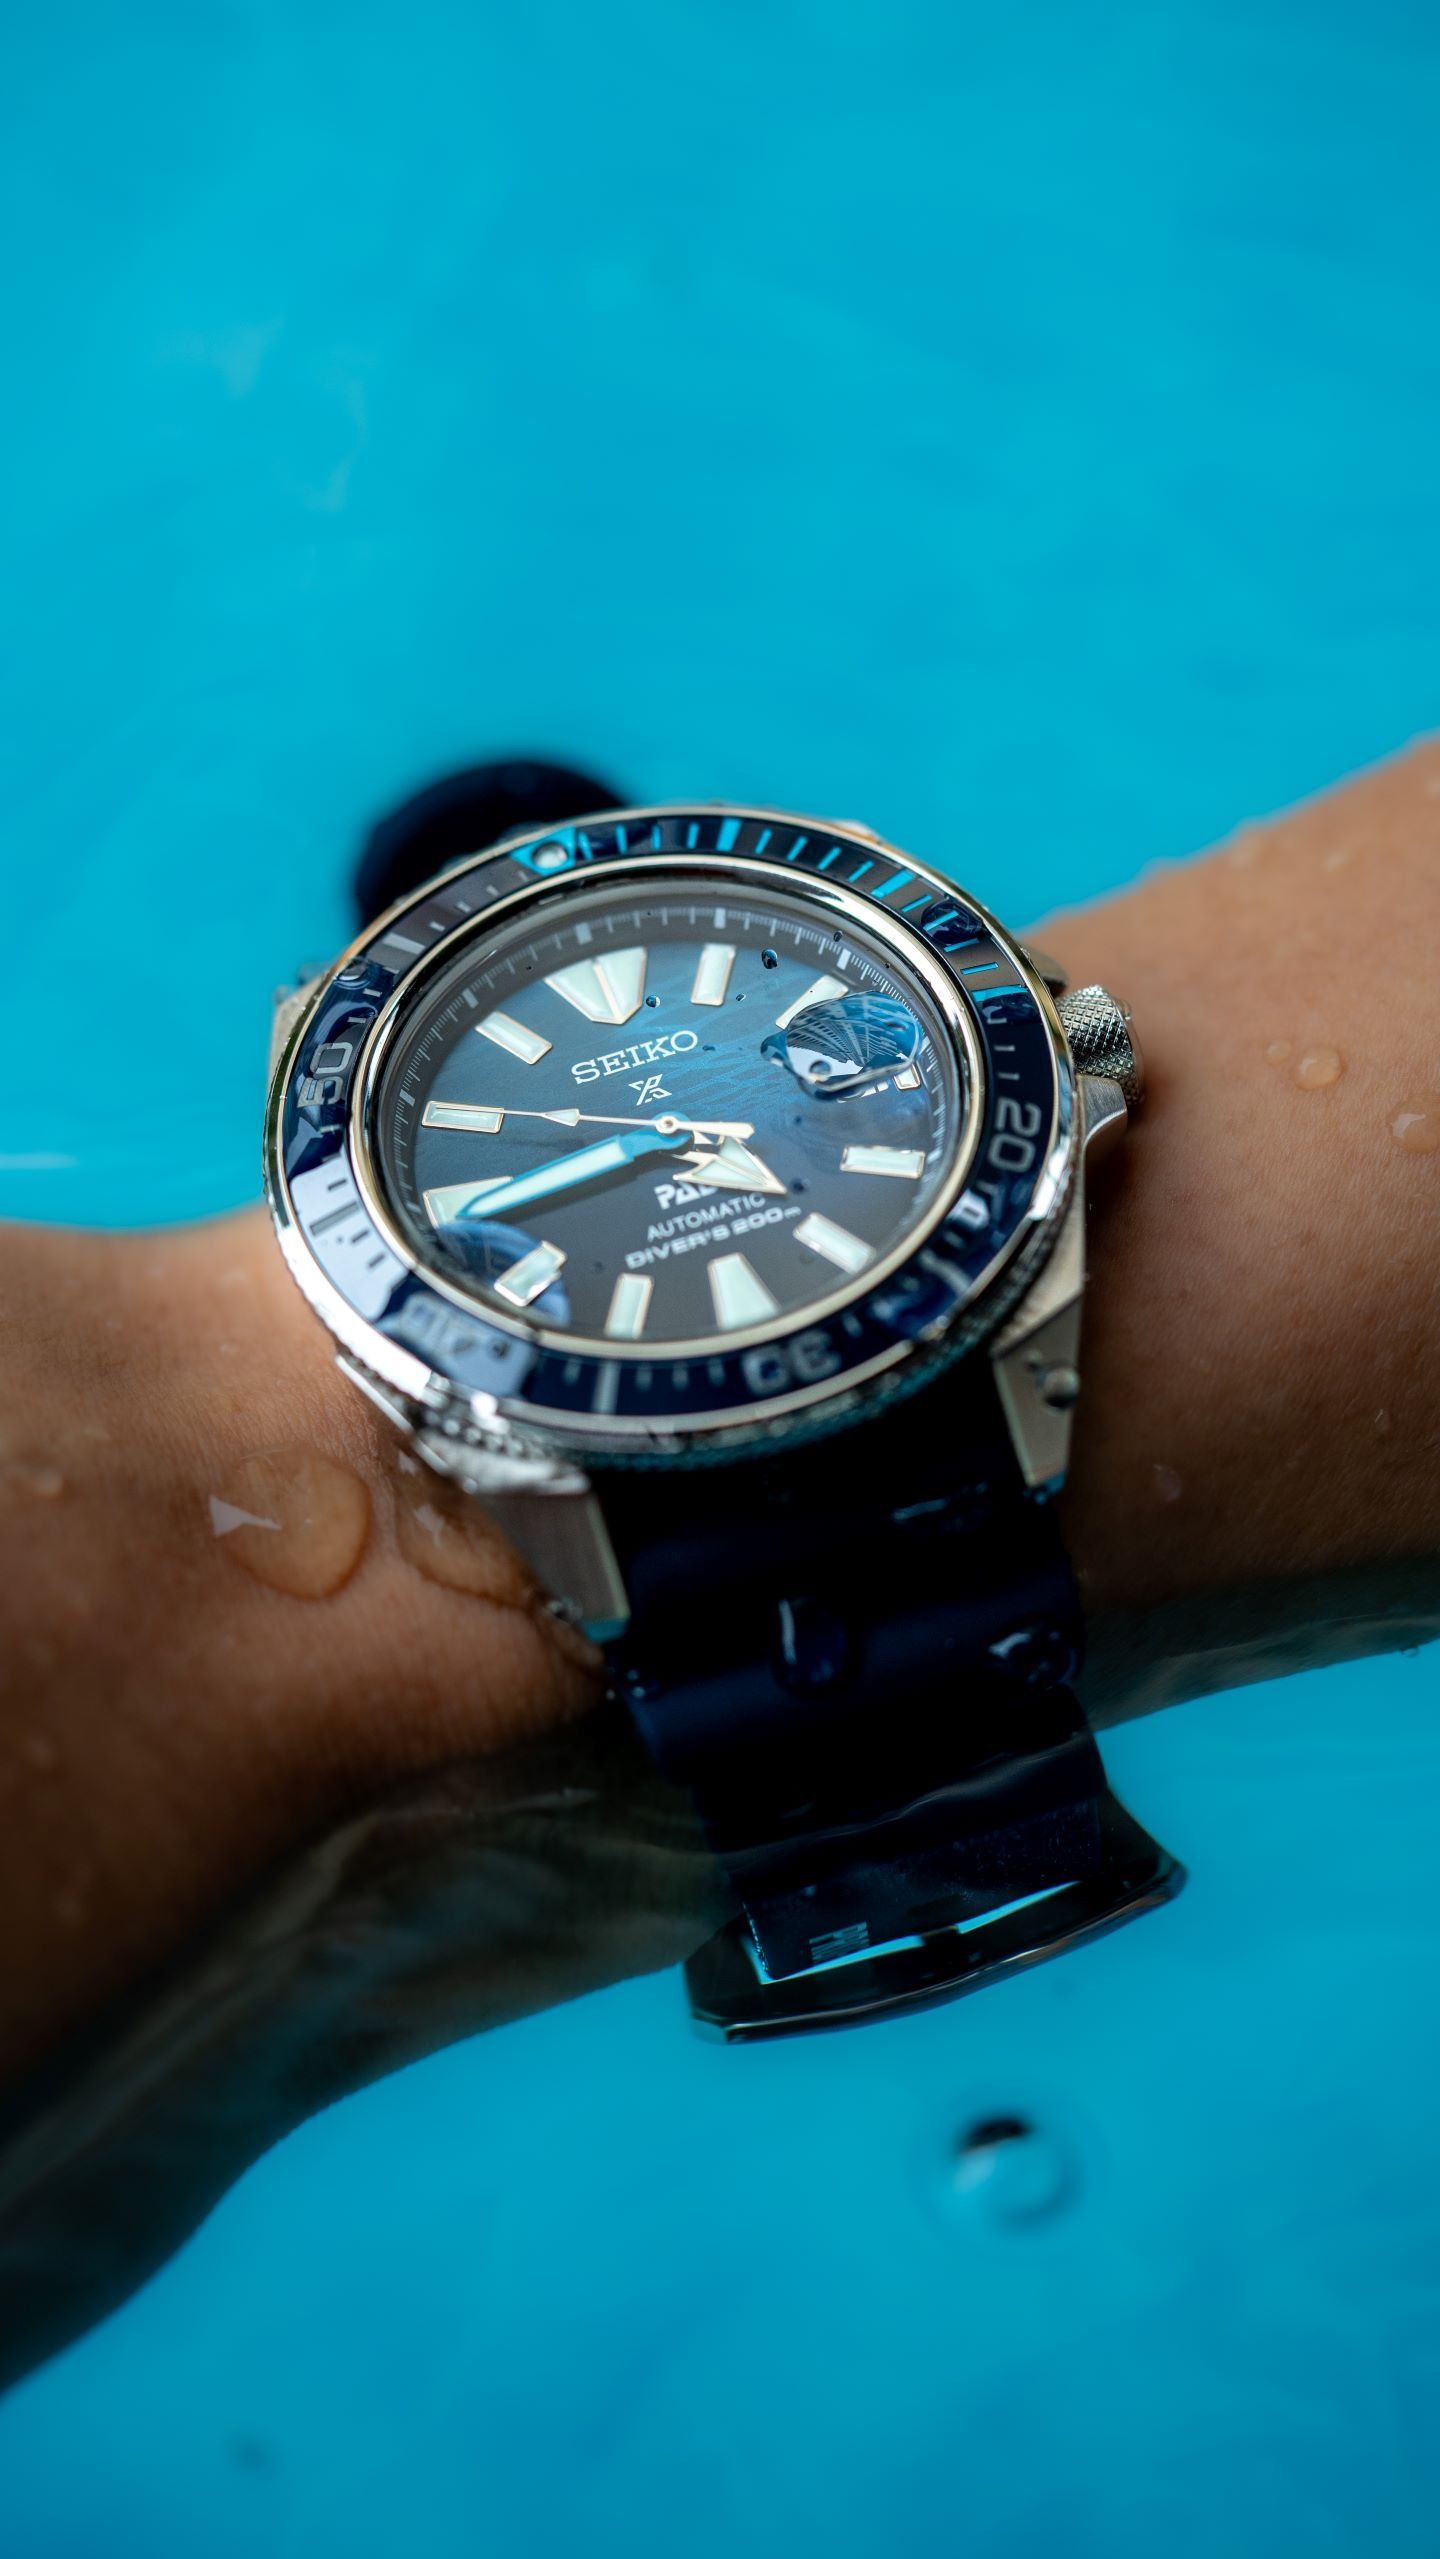 Unidirectional rotating bezel and blue dial